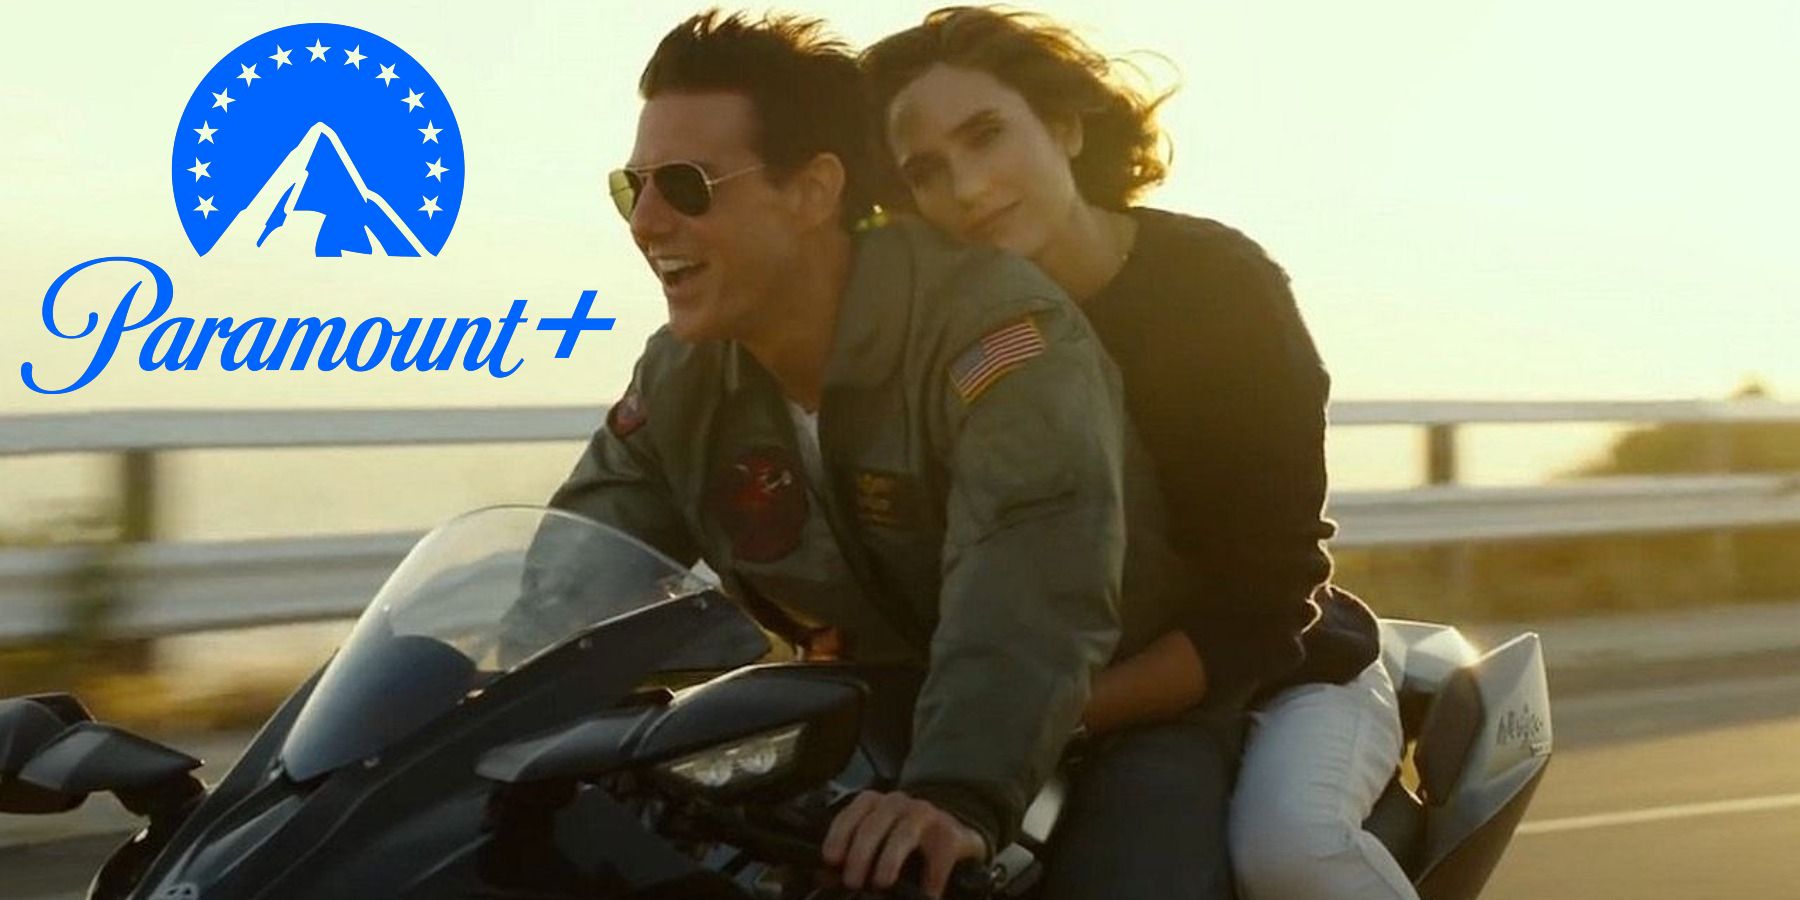 Tom Cruise and Jennifer Connelly riding motorcycle in Top Gun: Maverick with Paramount Plus logo